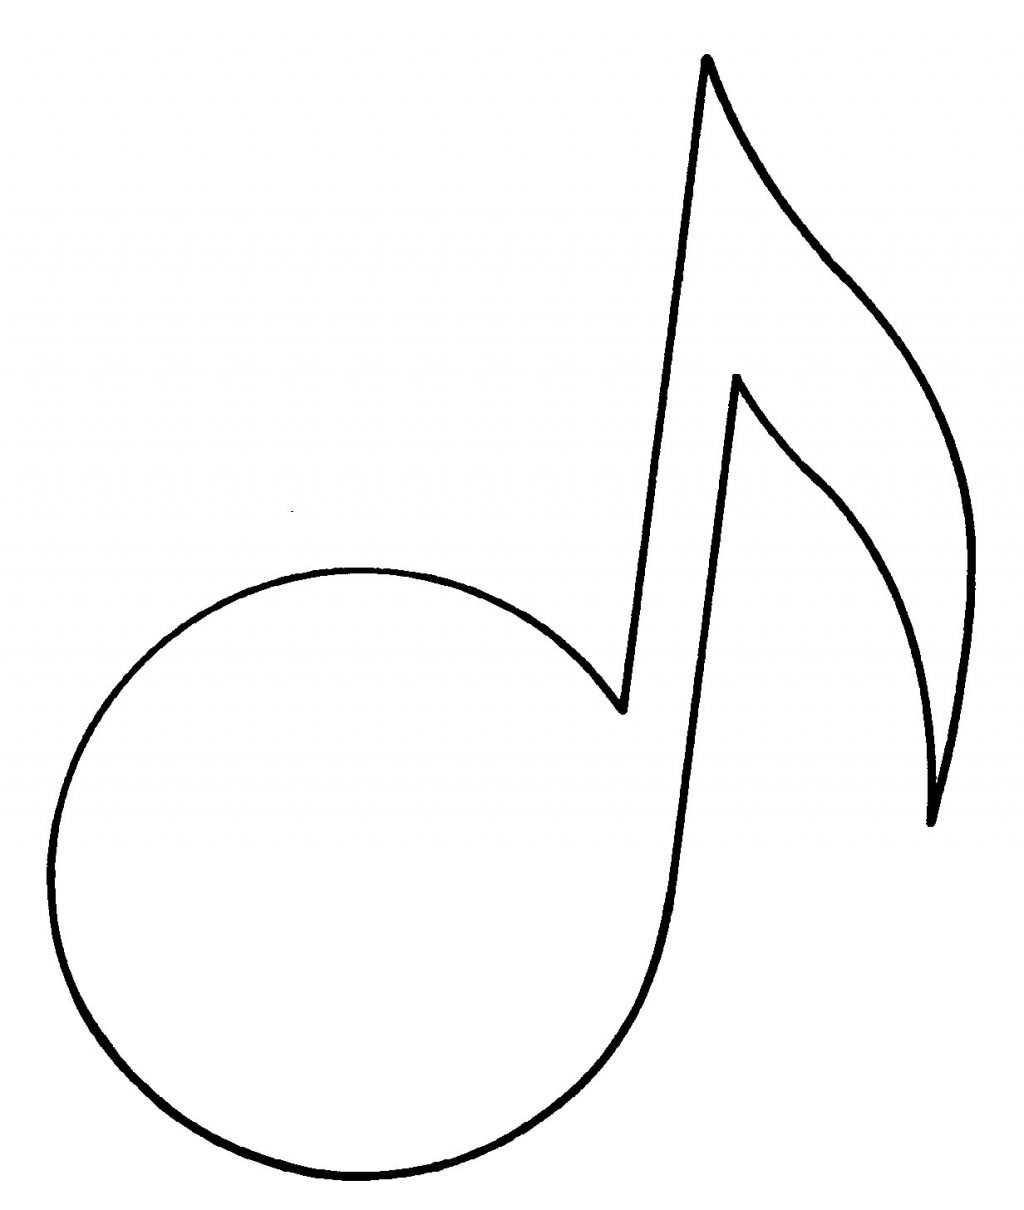 Music Notes Coloring Page Coloring Music Notesoring Pages Incredible Image Inspirations For